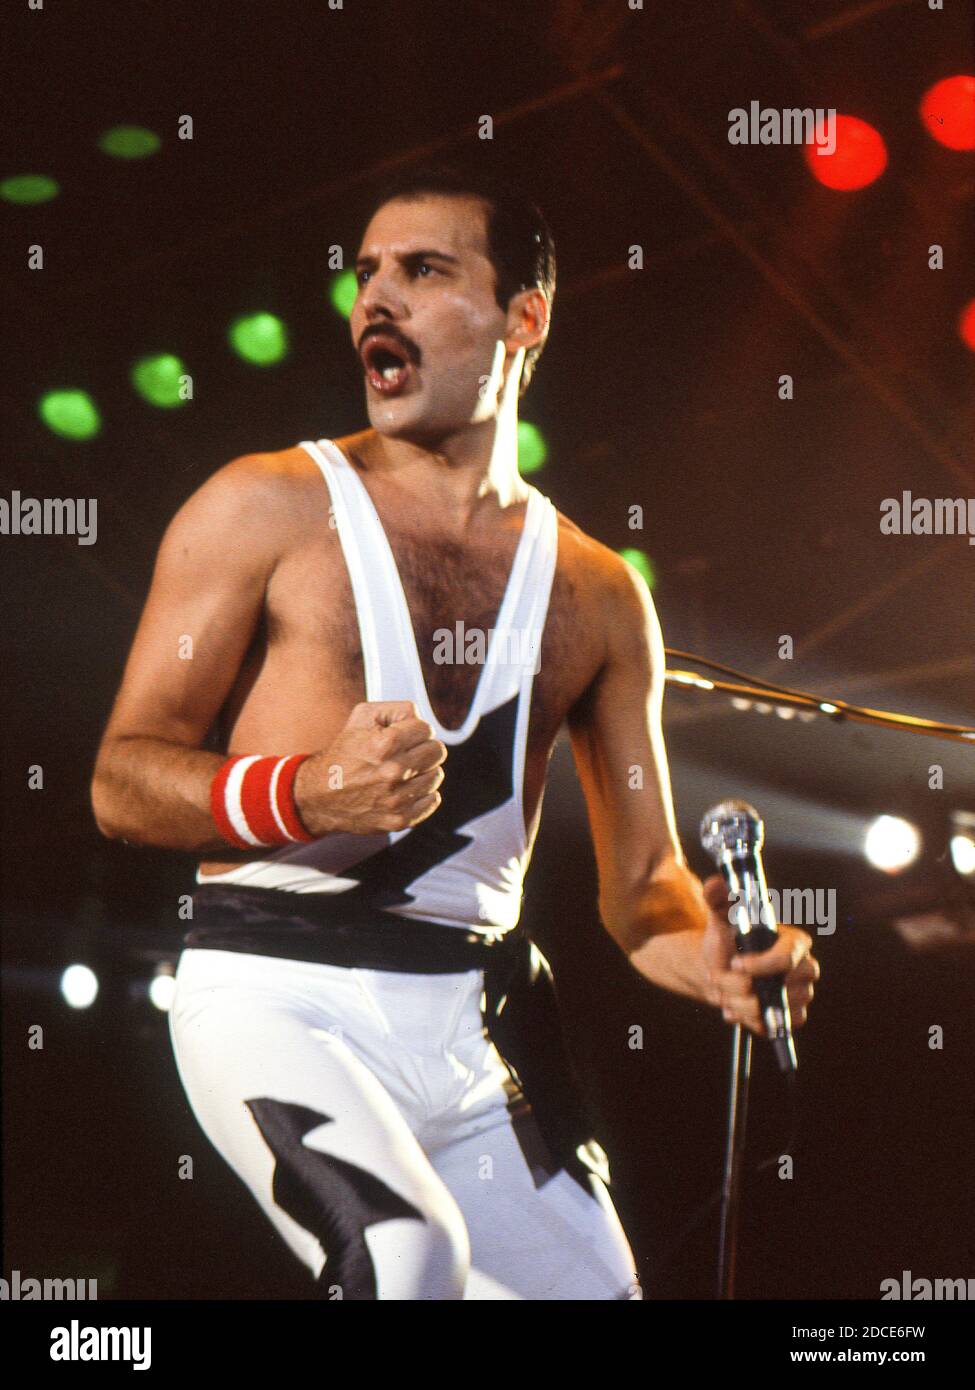 The British rock band Queen in concert at Wembley Arena,London 4.9.1984 Stock Photo